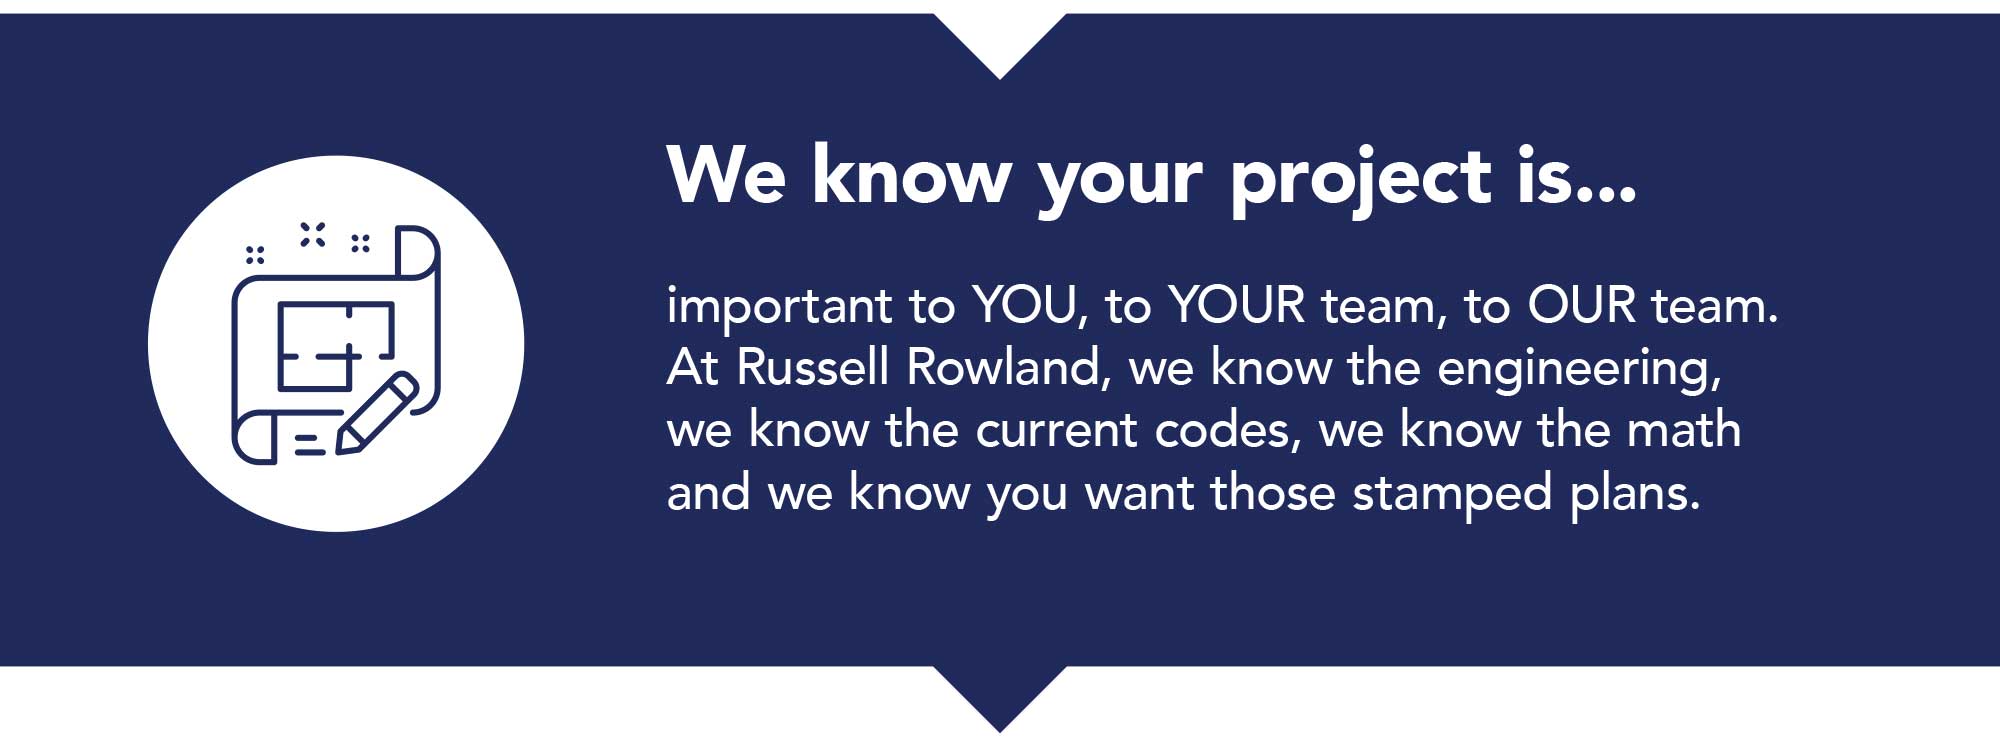 We know your project is important.